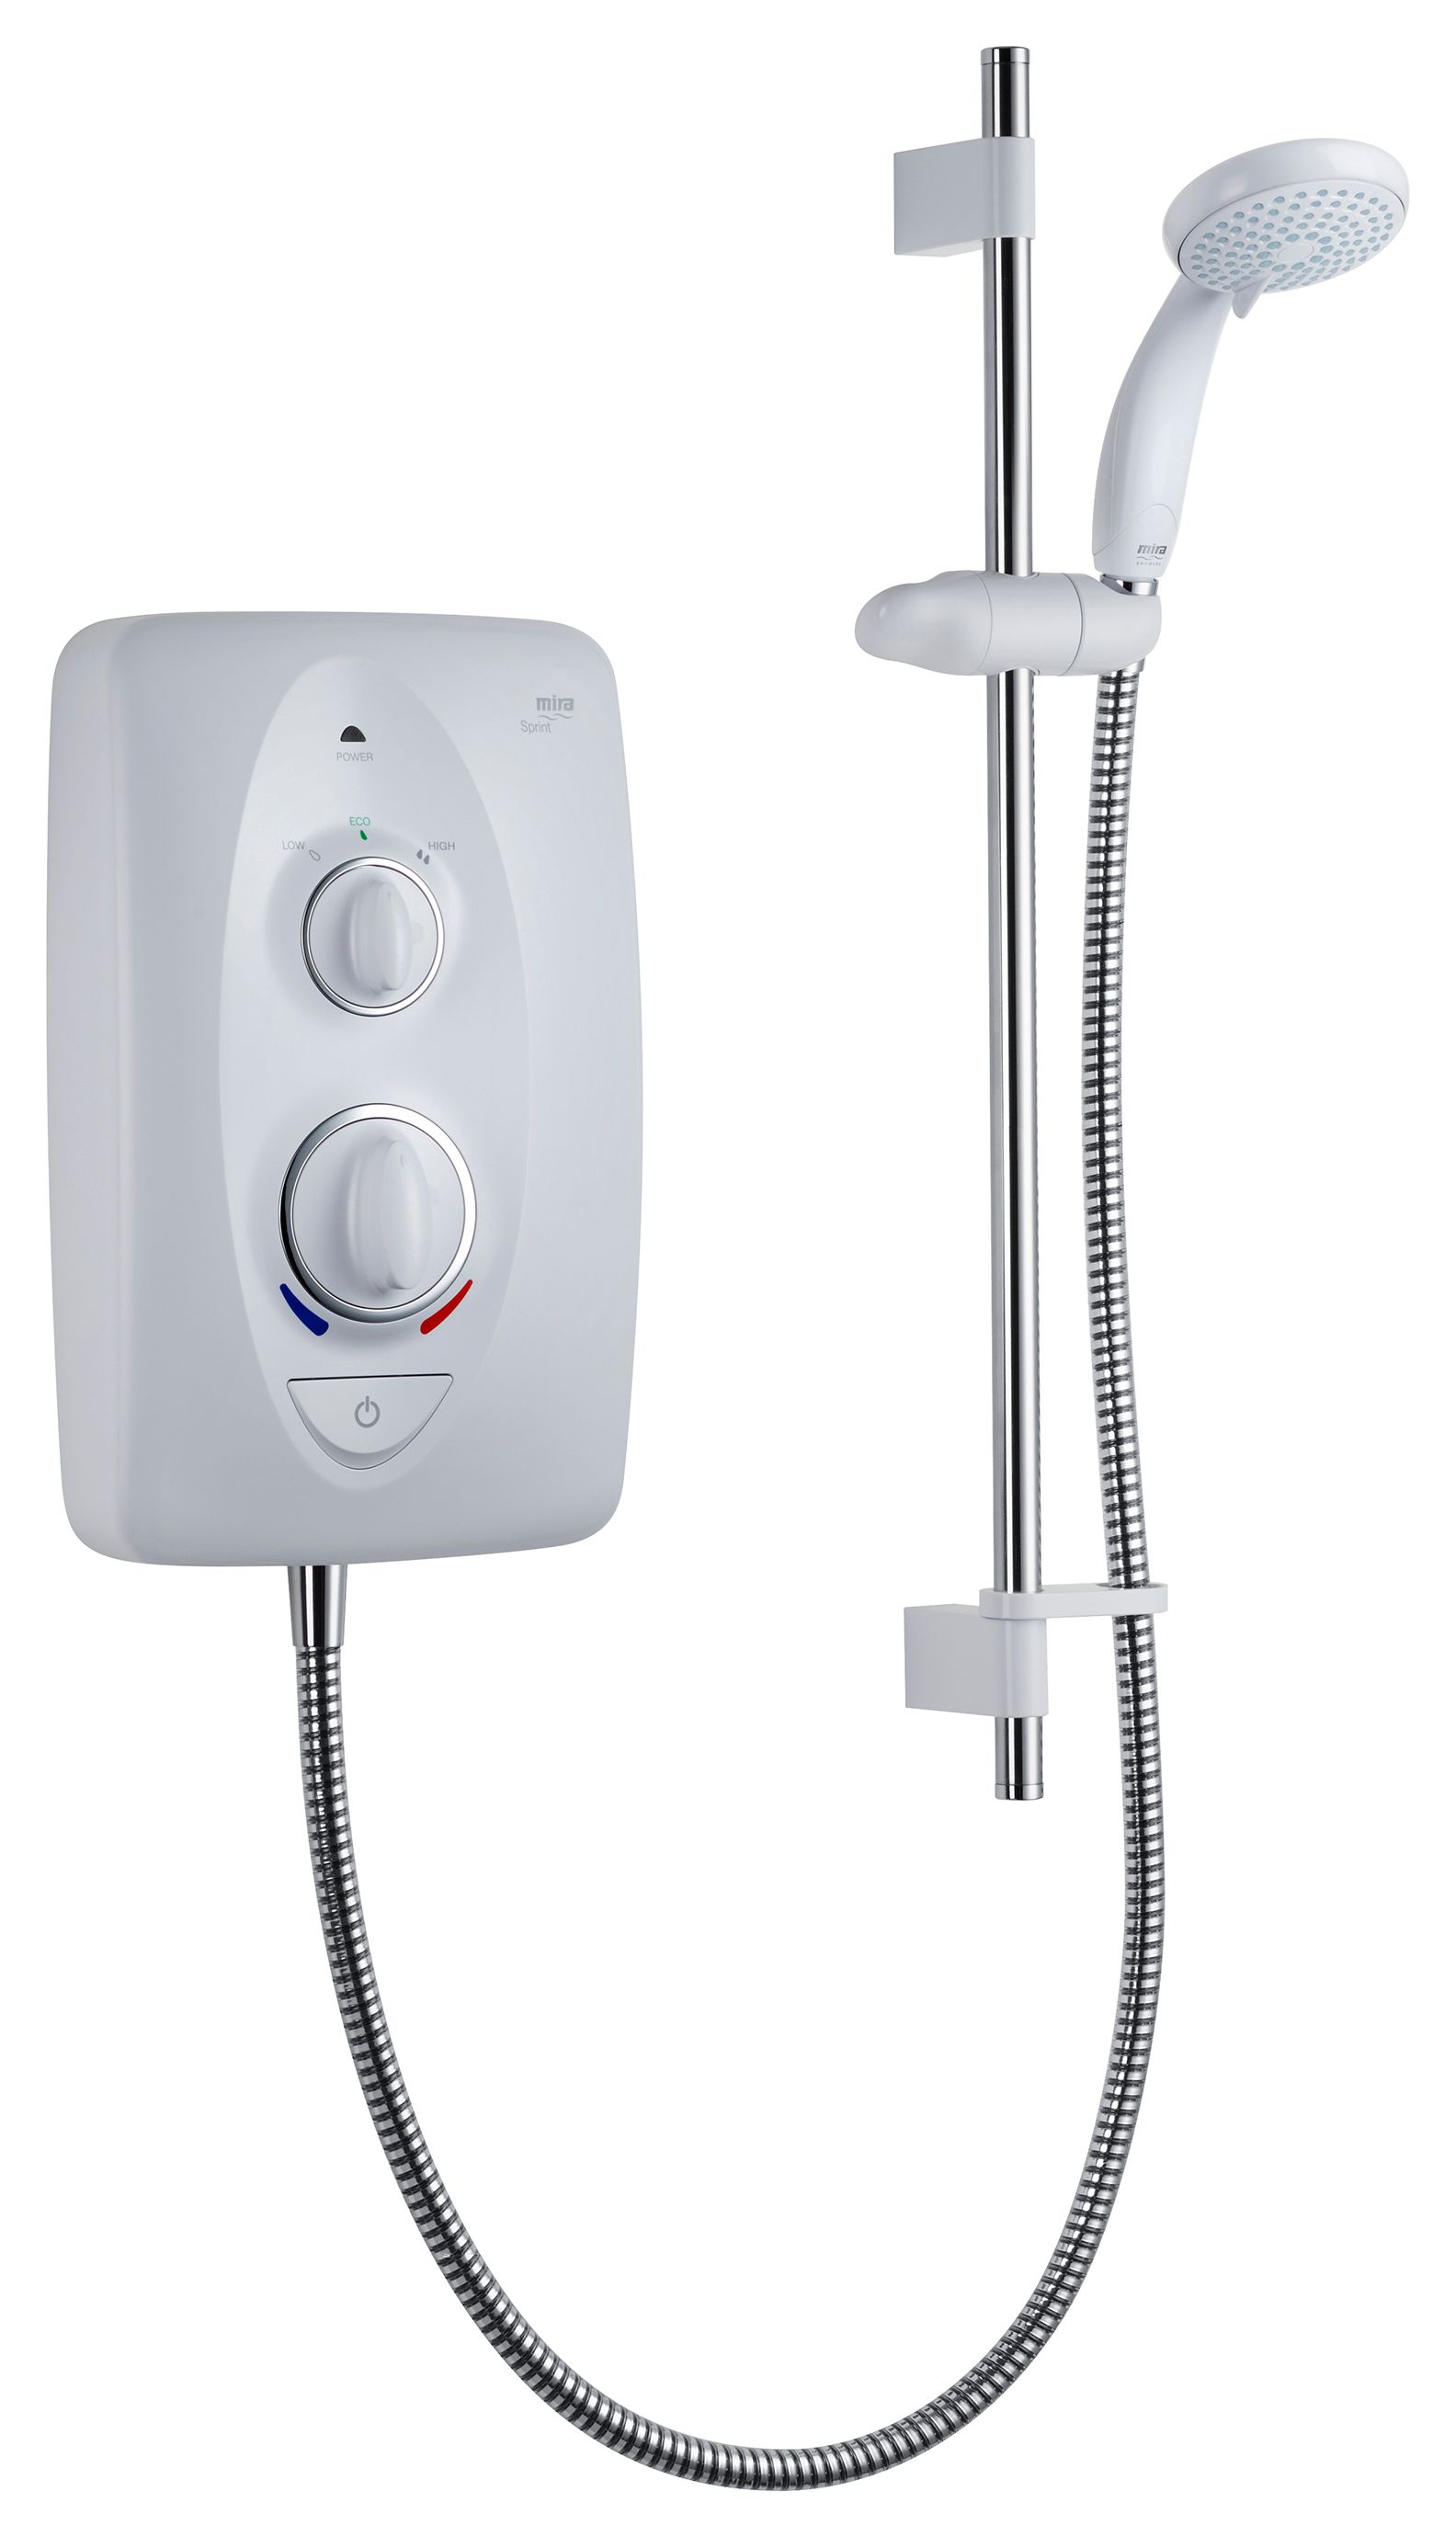 Image of Mira Sprint 8.5kW Electric Shower